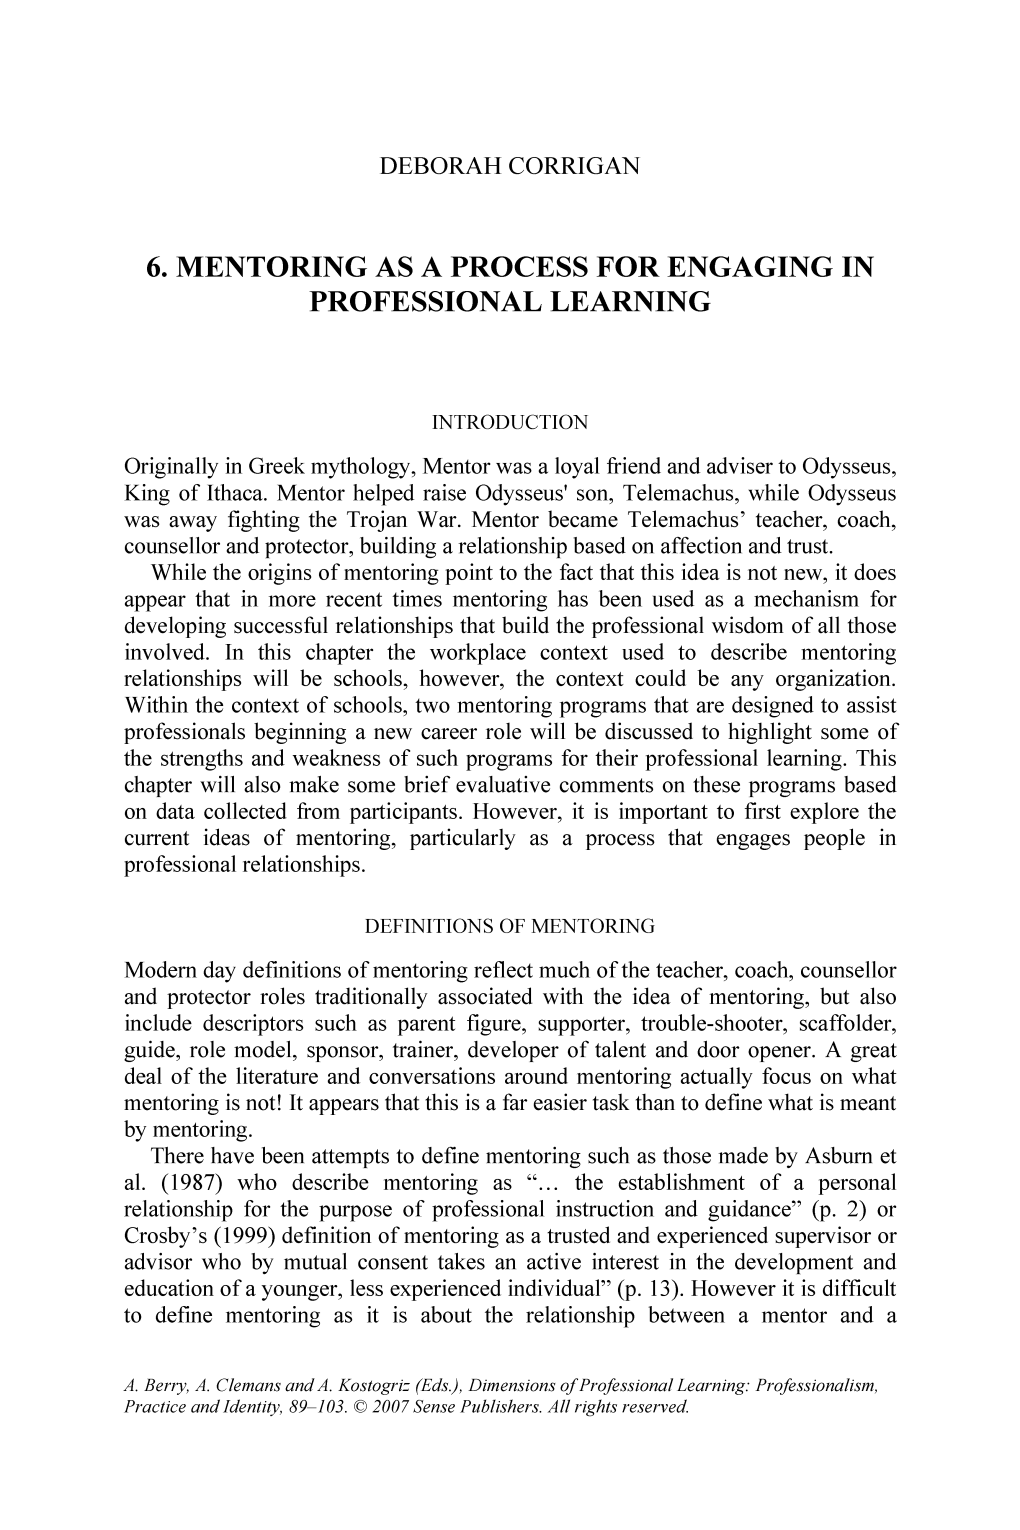 6. Mentoring As a Process for Engaging in Professional Learning